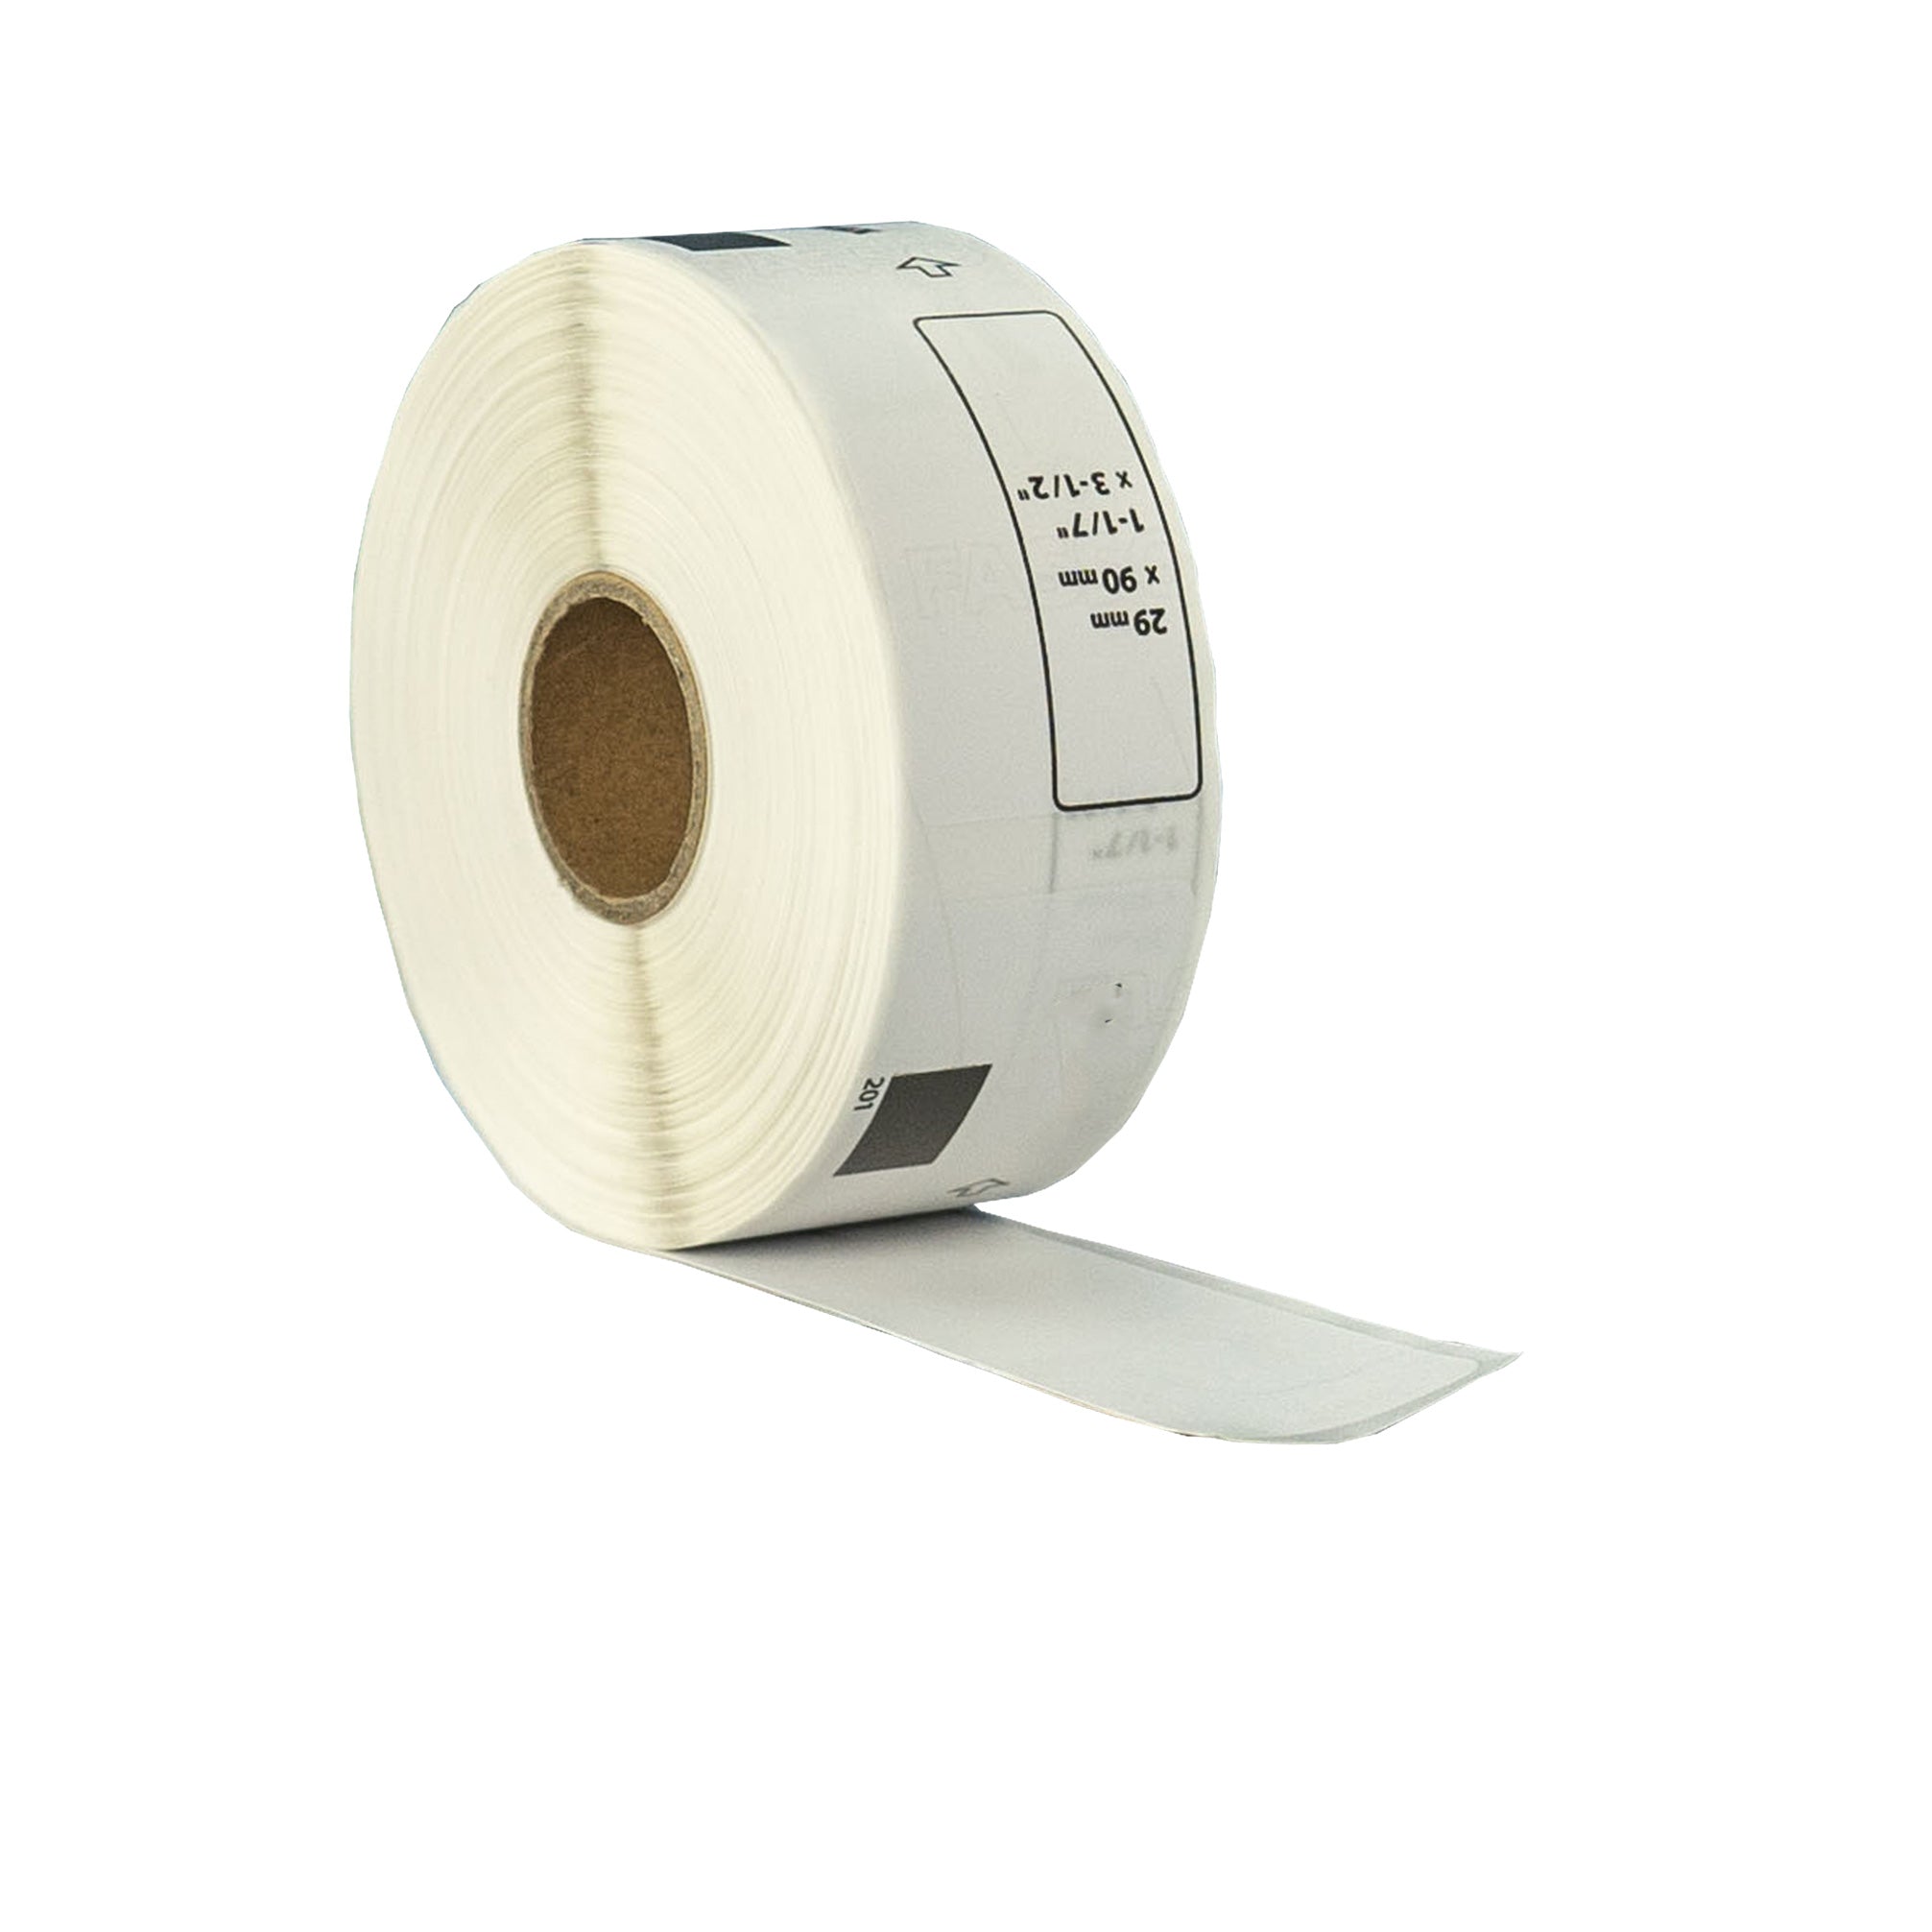 Compatible Brother DK-11201 White Refill Address Labels 29 x 90mm / 50 Rolls